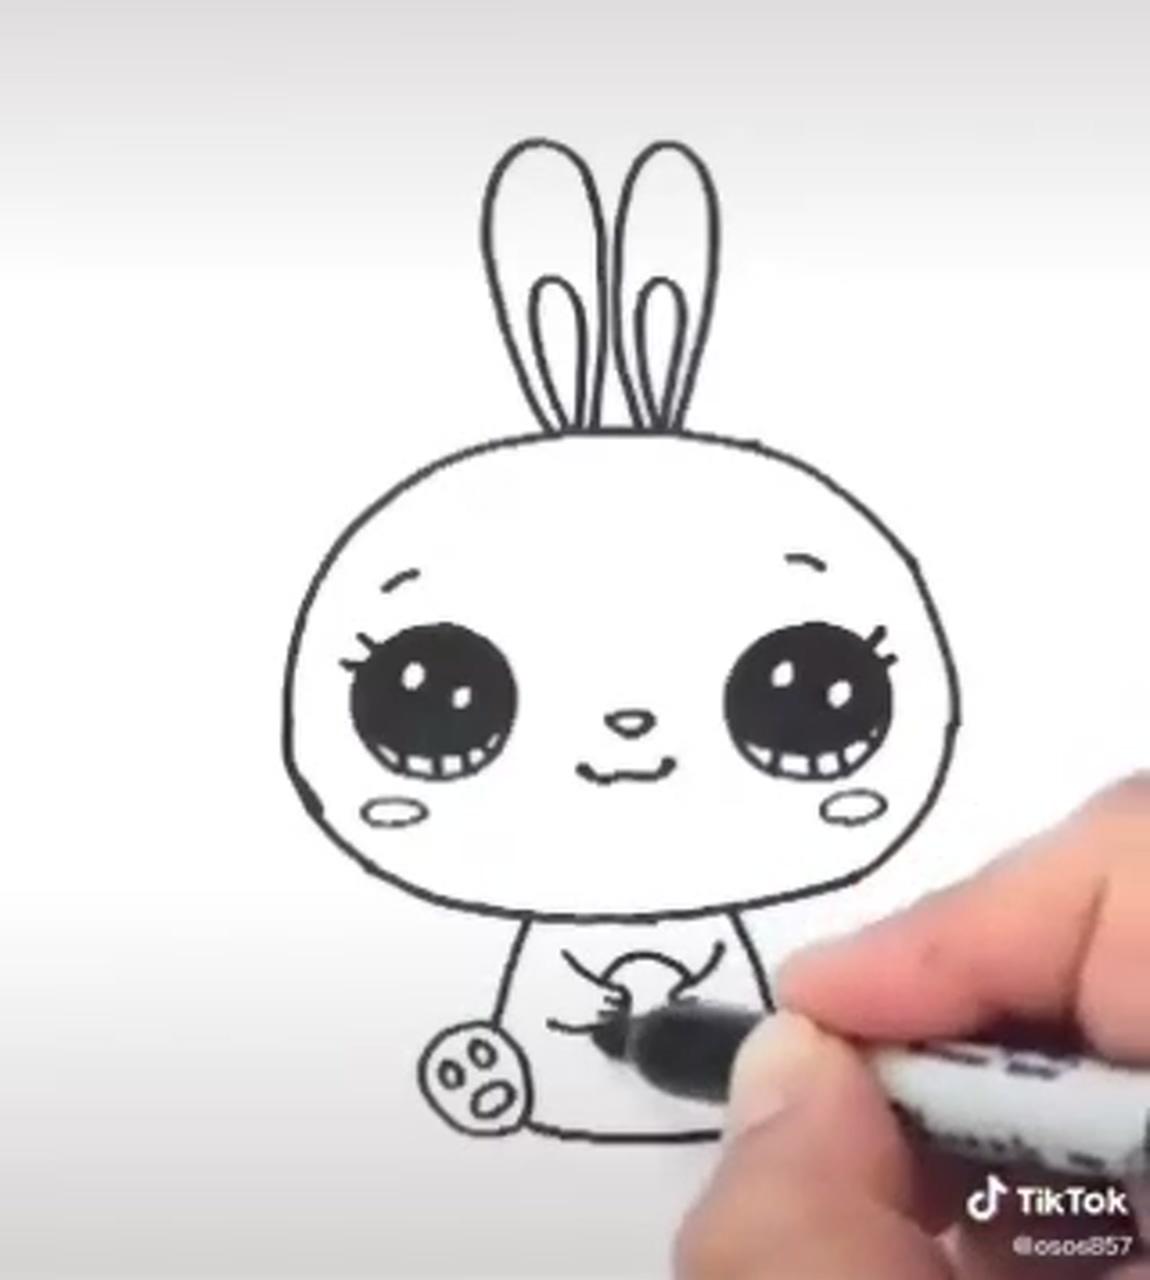 How to draw a bunny; cute doodles drawings